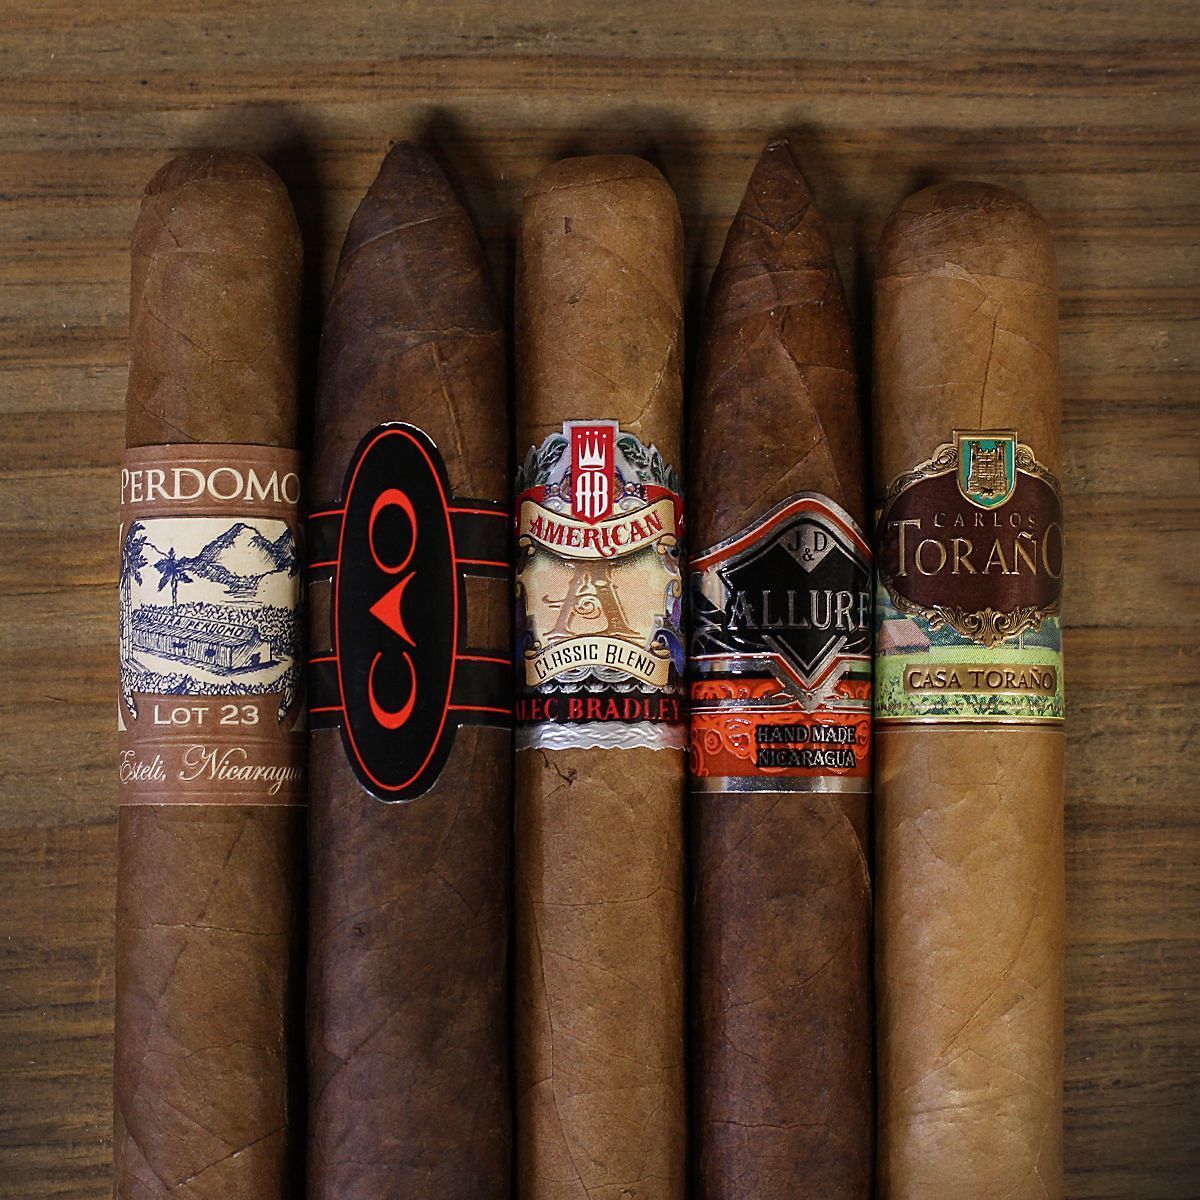 cheaphumidors:
“ Ohhh what to smoke? What shall the smoke be today! I’m in between the Casa Torano and the American Classic Blend. Which one(s) would you smoke?
#BOTL #SOTL #smokecigars #cigarlover #smoketobacco #AmericanClassicBlend #AlecBradley...